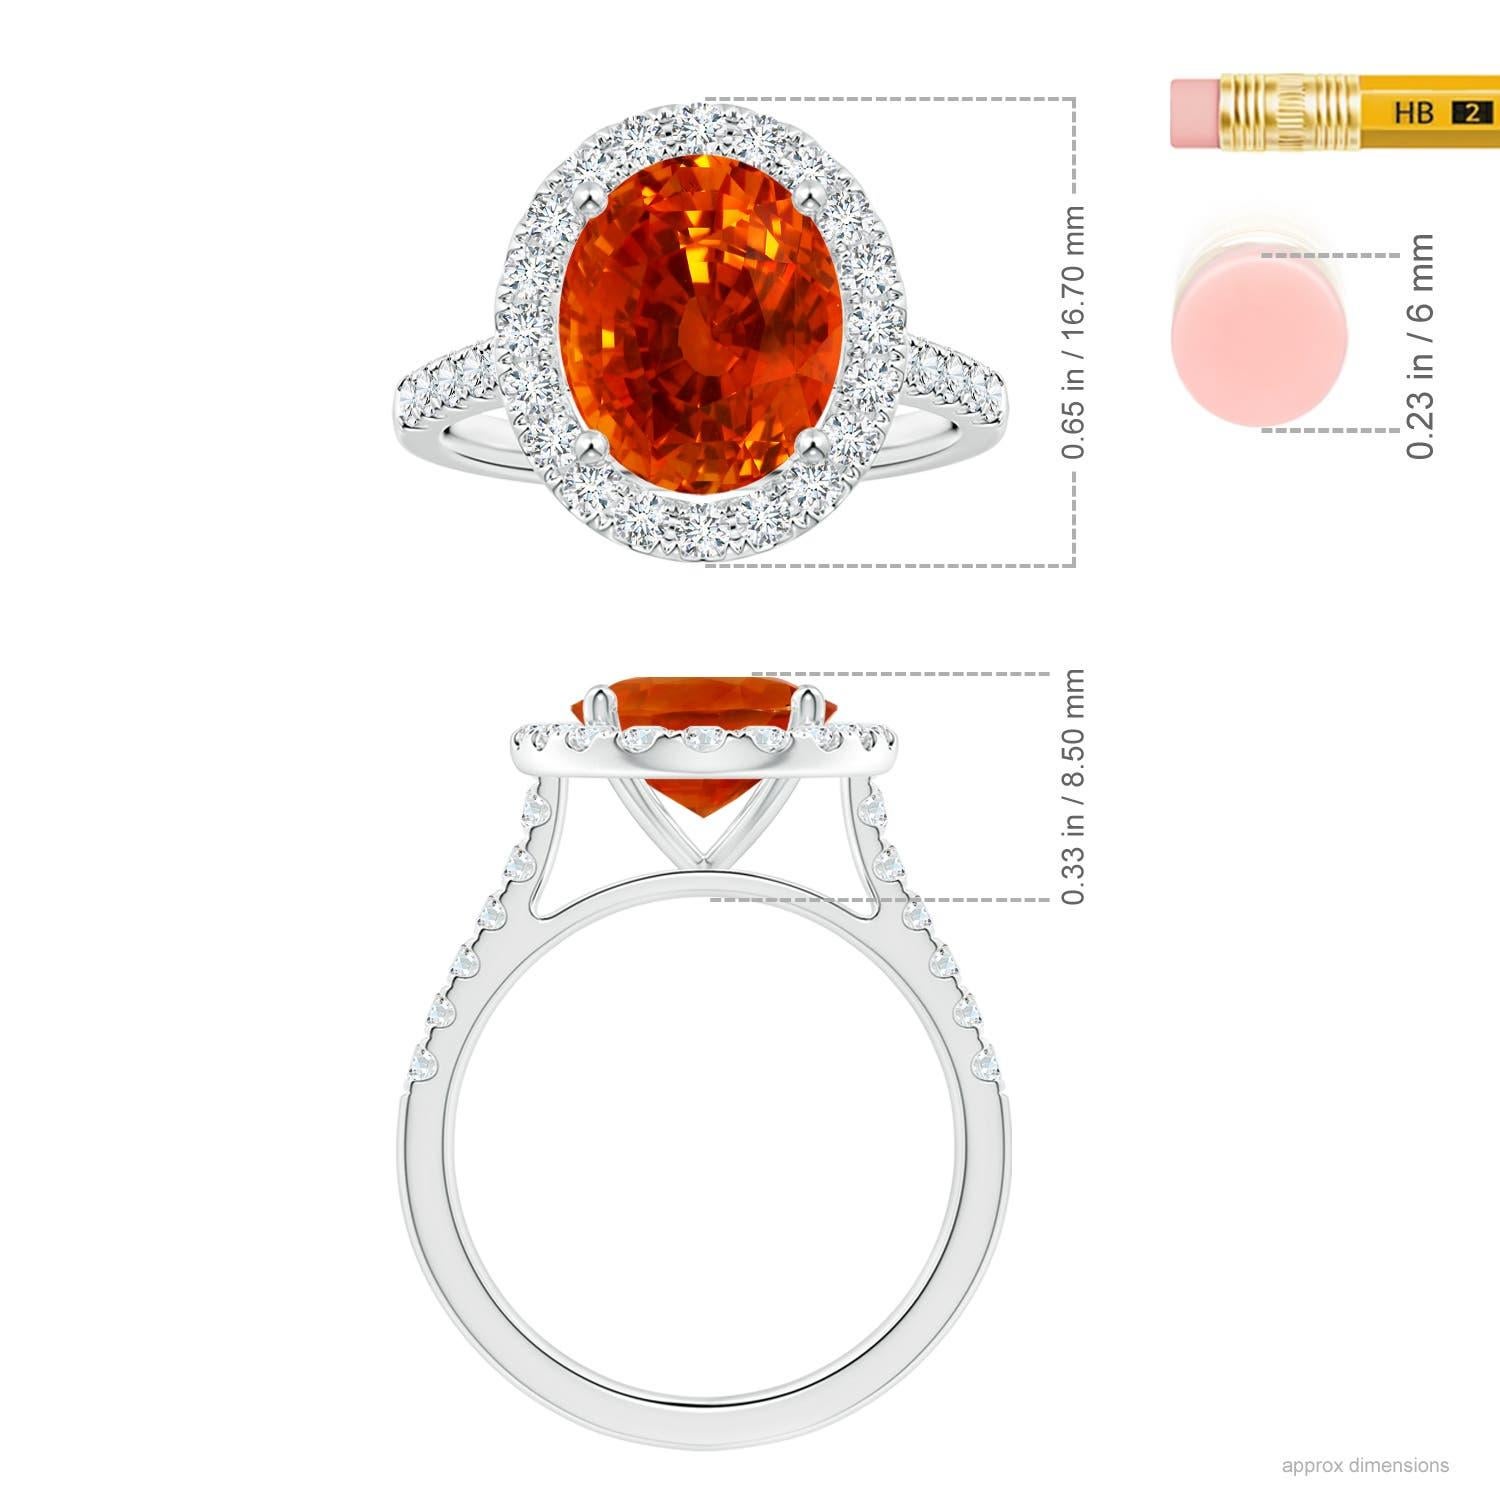 For Sale:  Angara Gia Certified Natural Orange Sapphire Diamond Halo Ring in White Gold 5